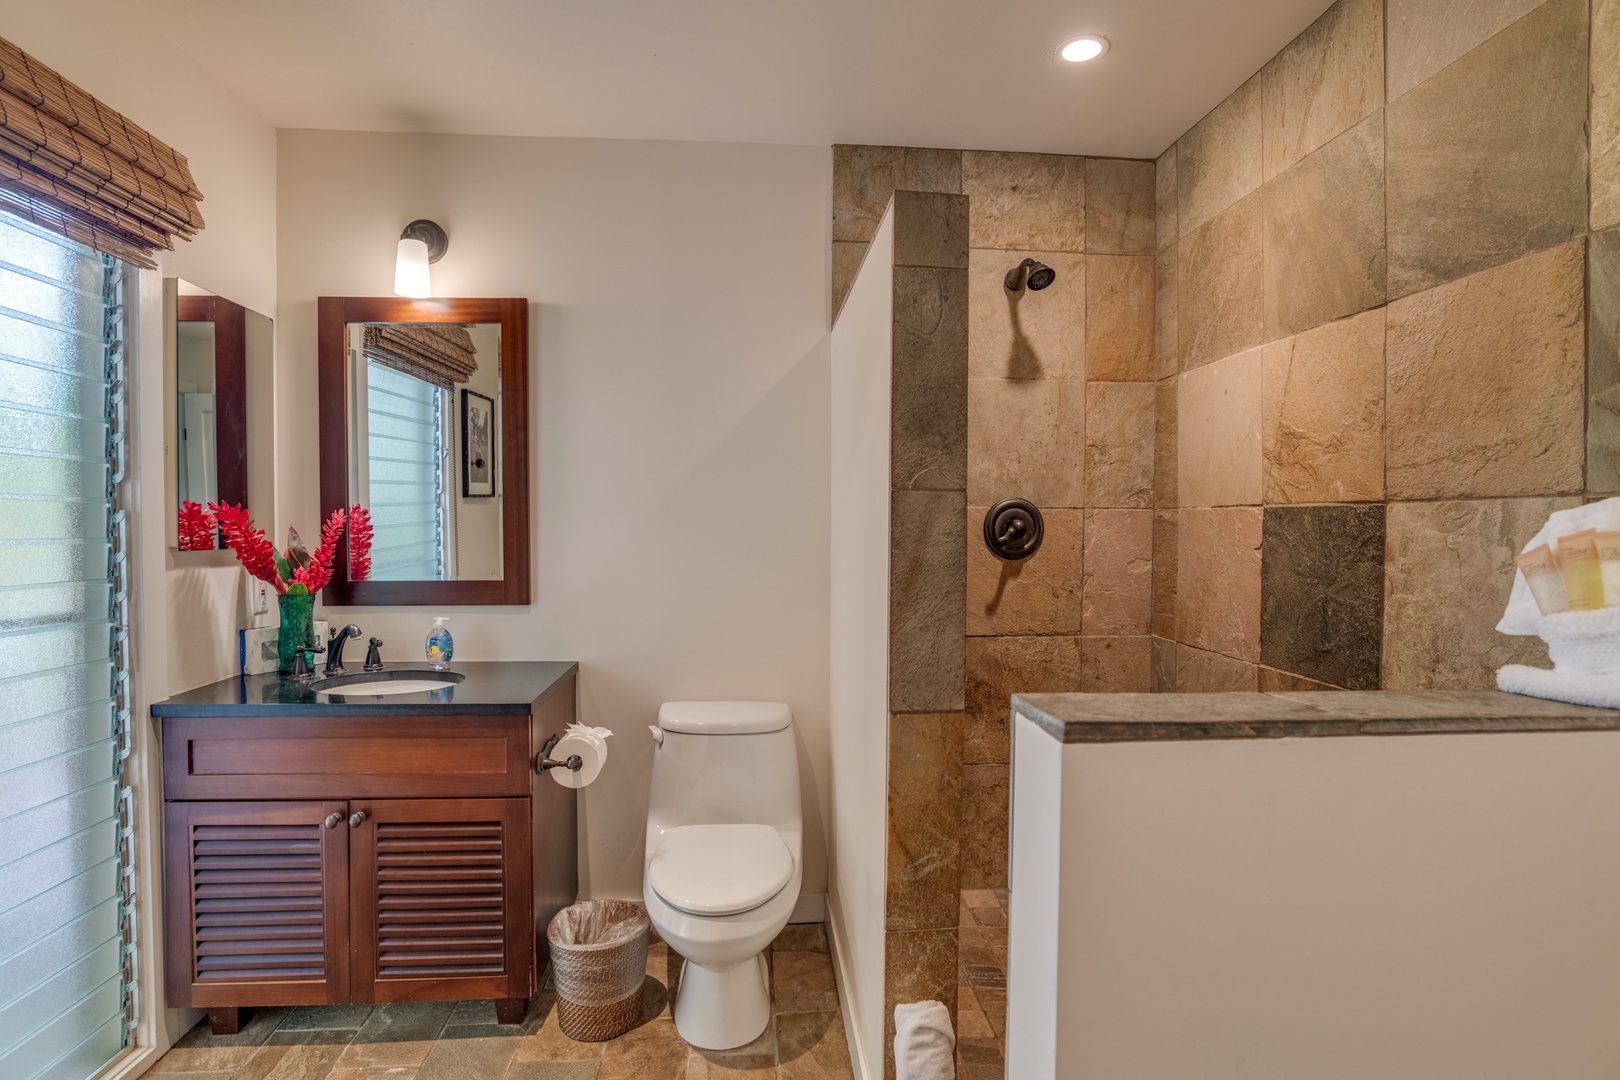 Lahaina Vacation Rentals, Aina Nalu D103 - Single vanity and walk-in tiled shower